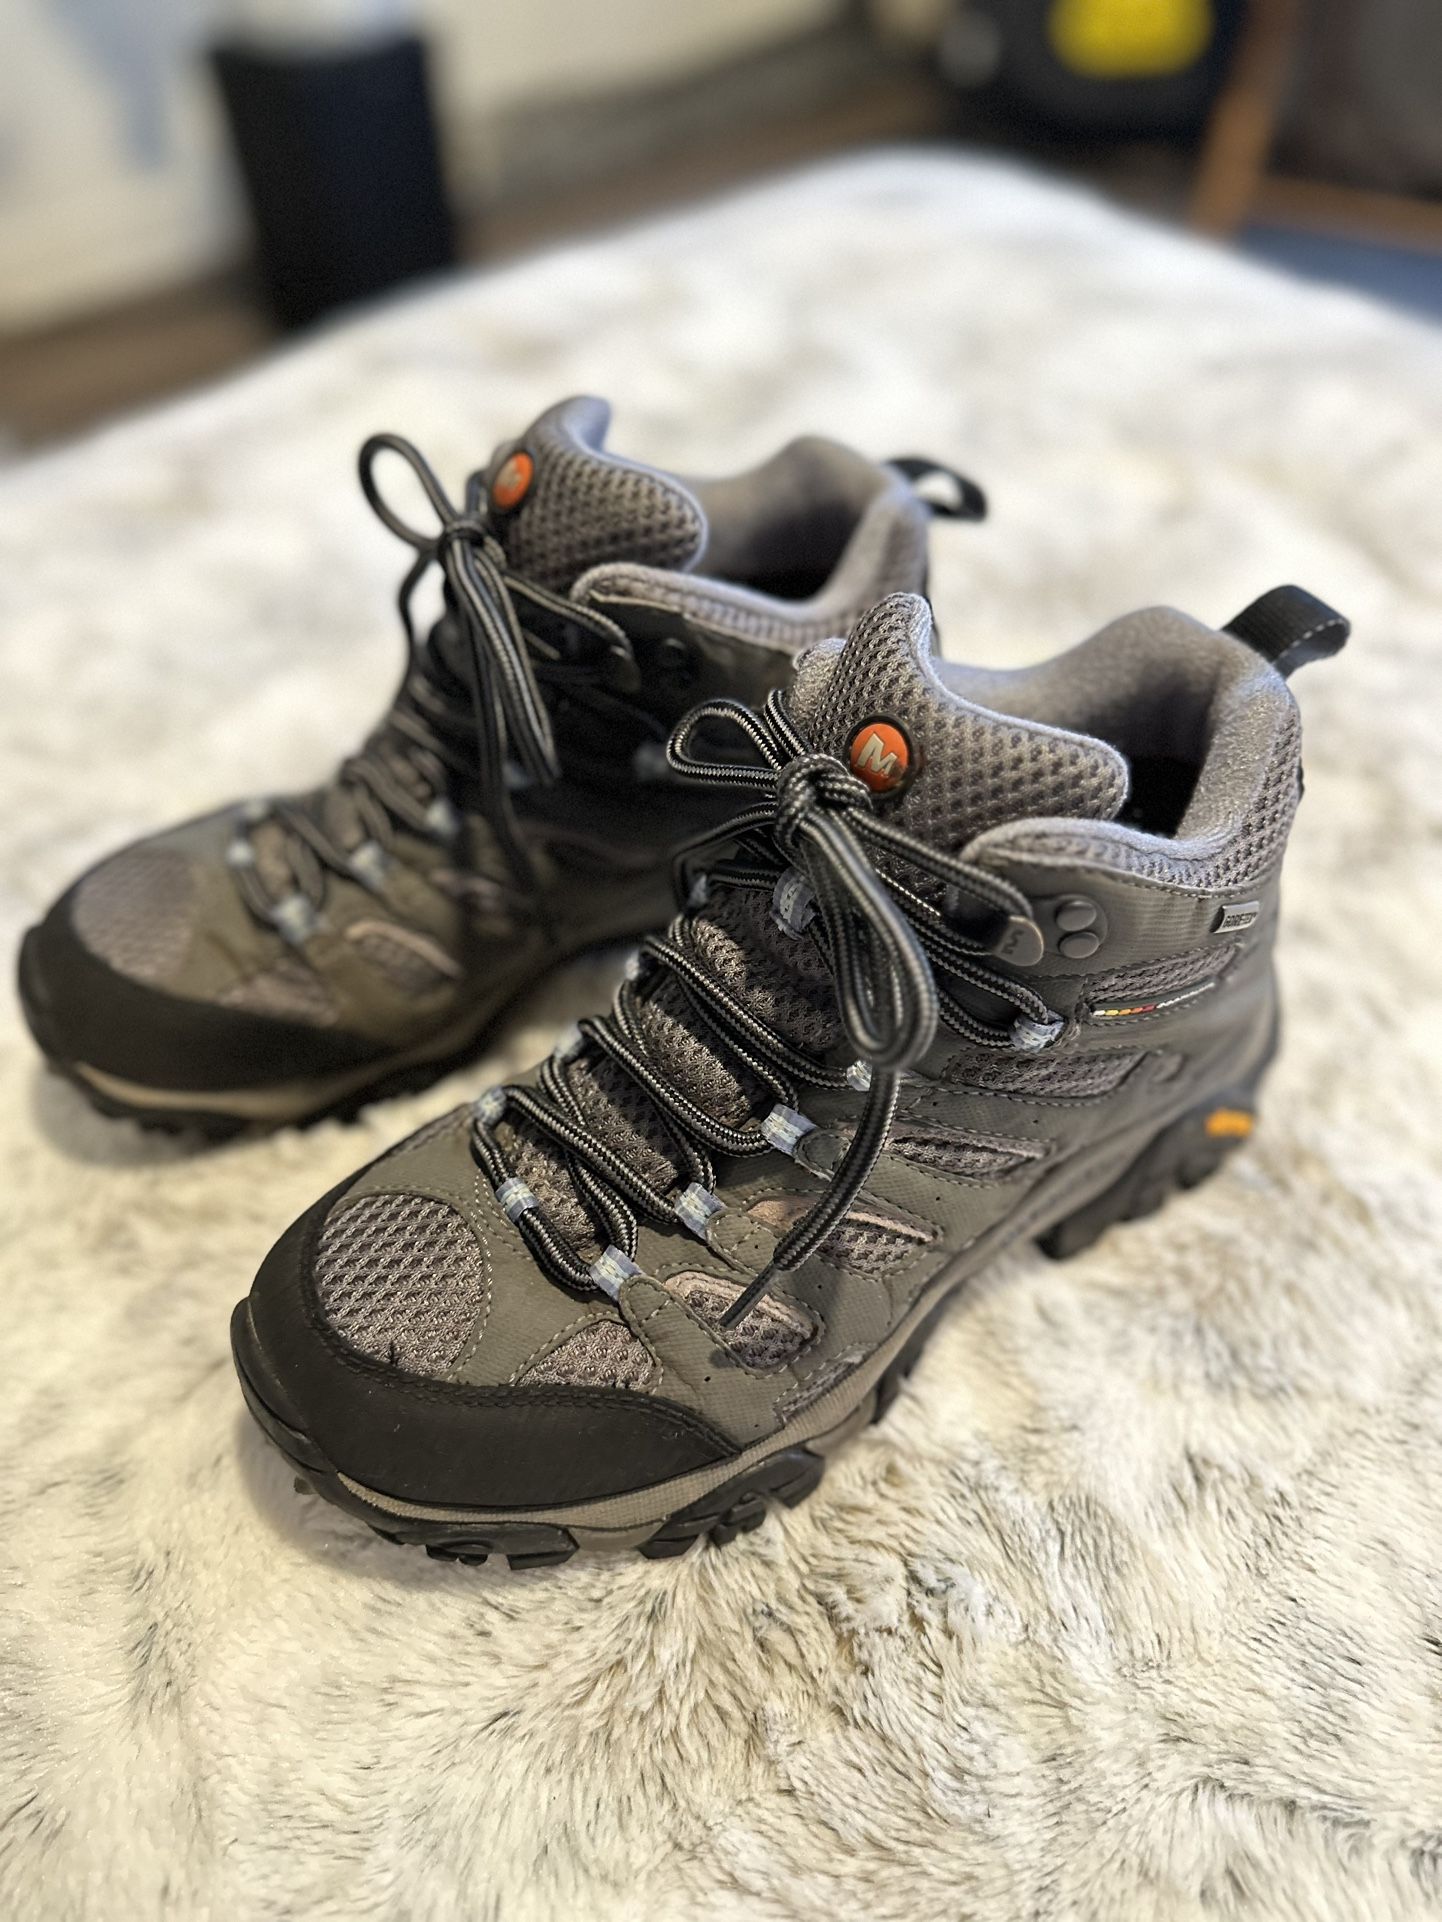 Merrell Hiking Boots - Size 7